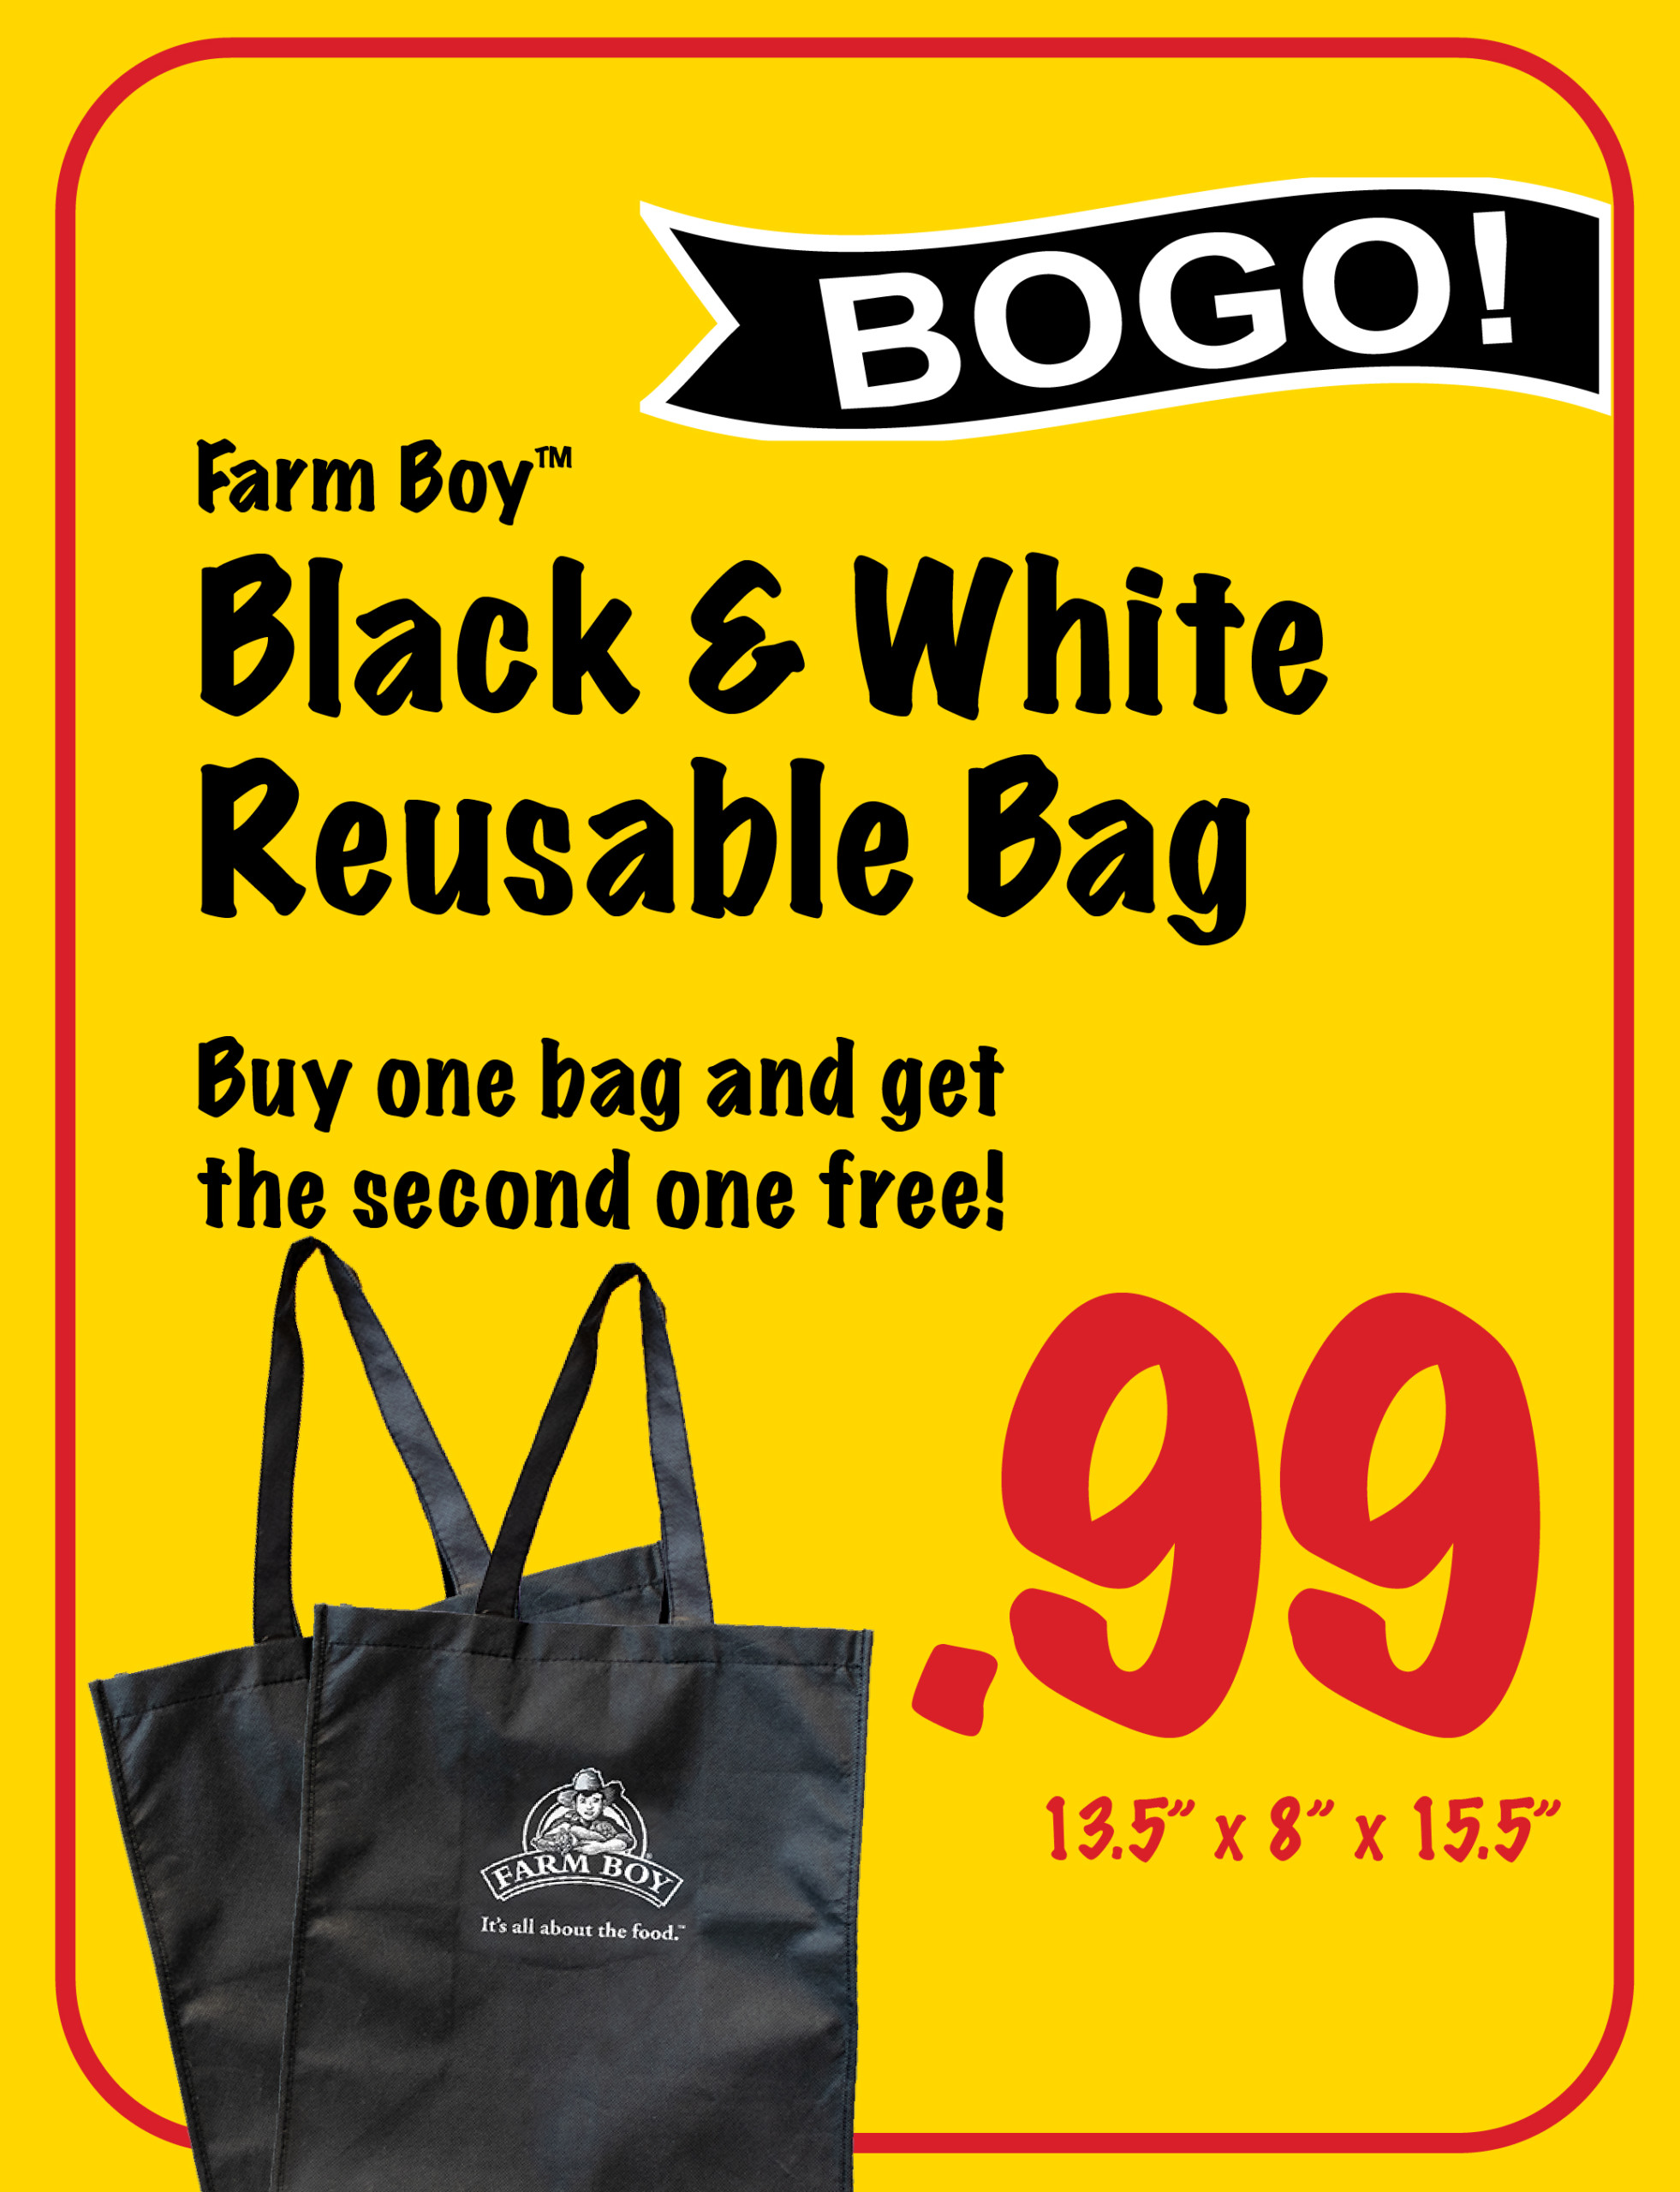 Farm Boy Black and White reusable bags, buy one and get on free,